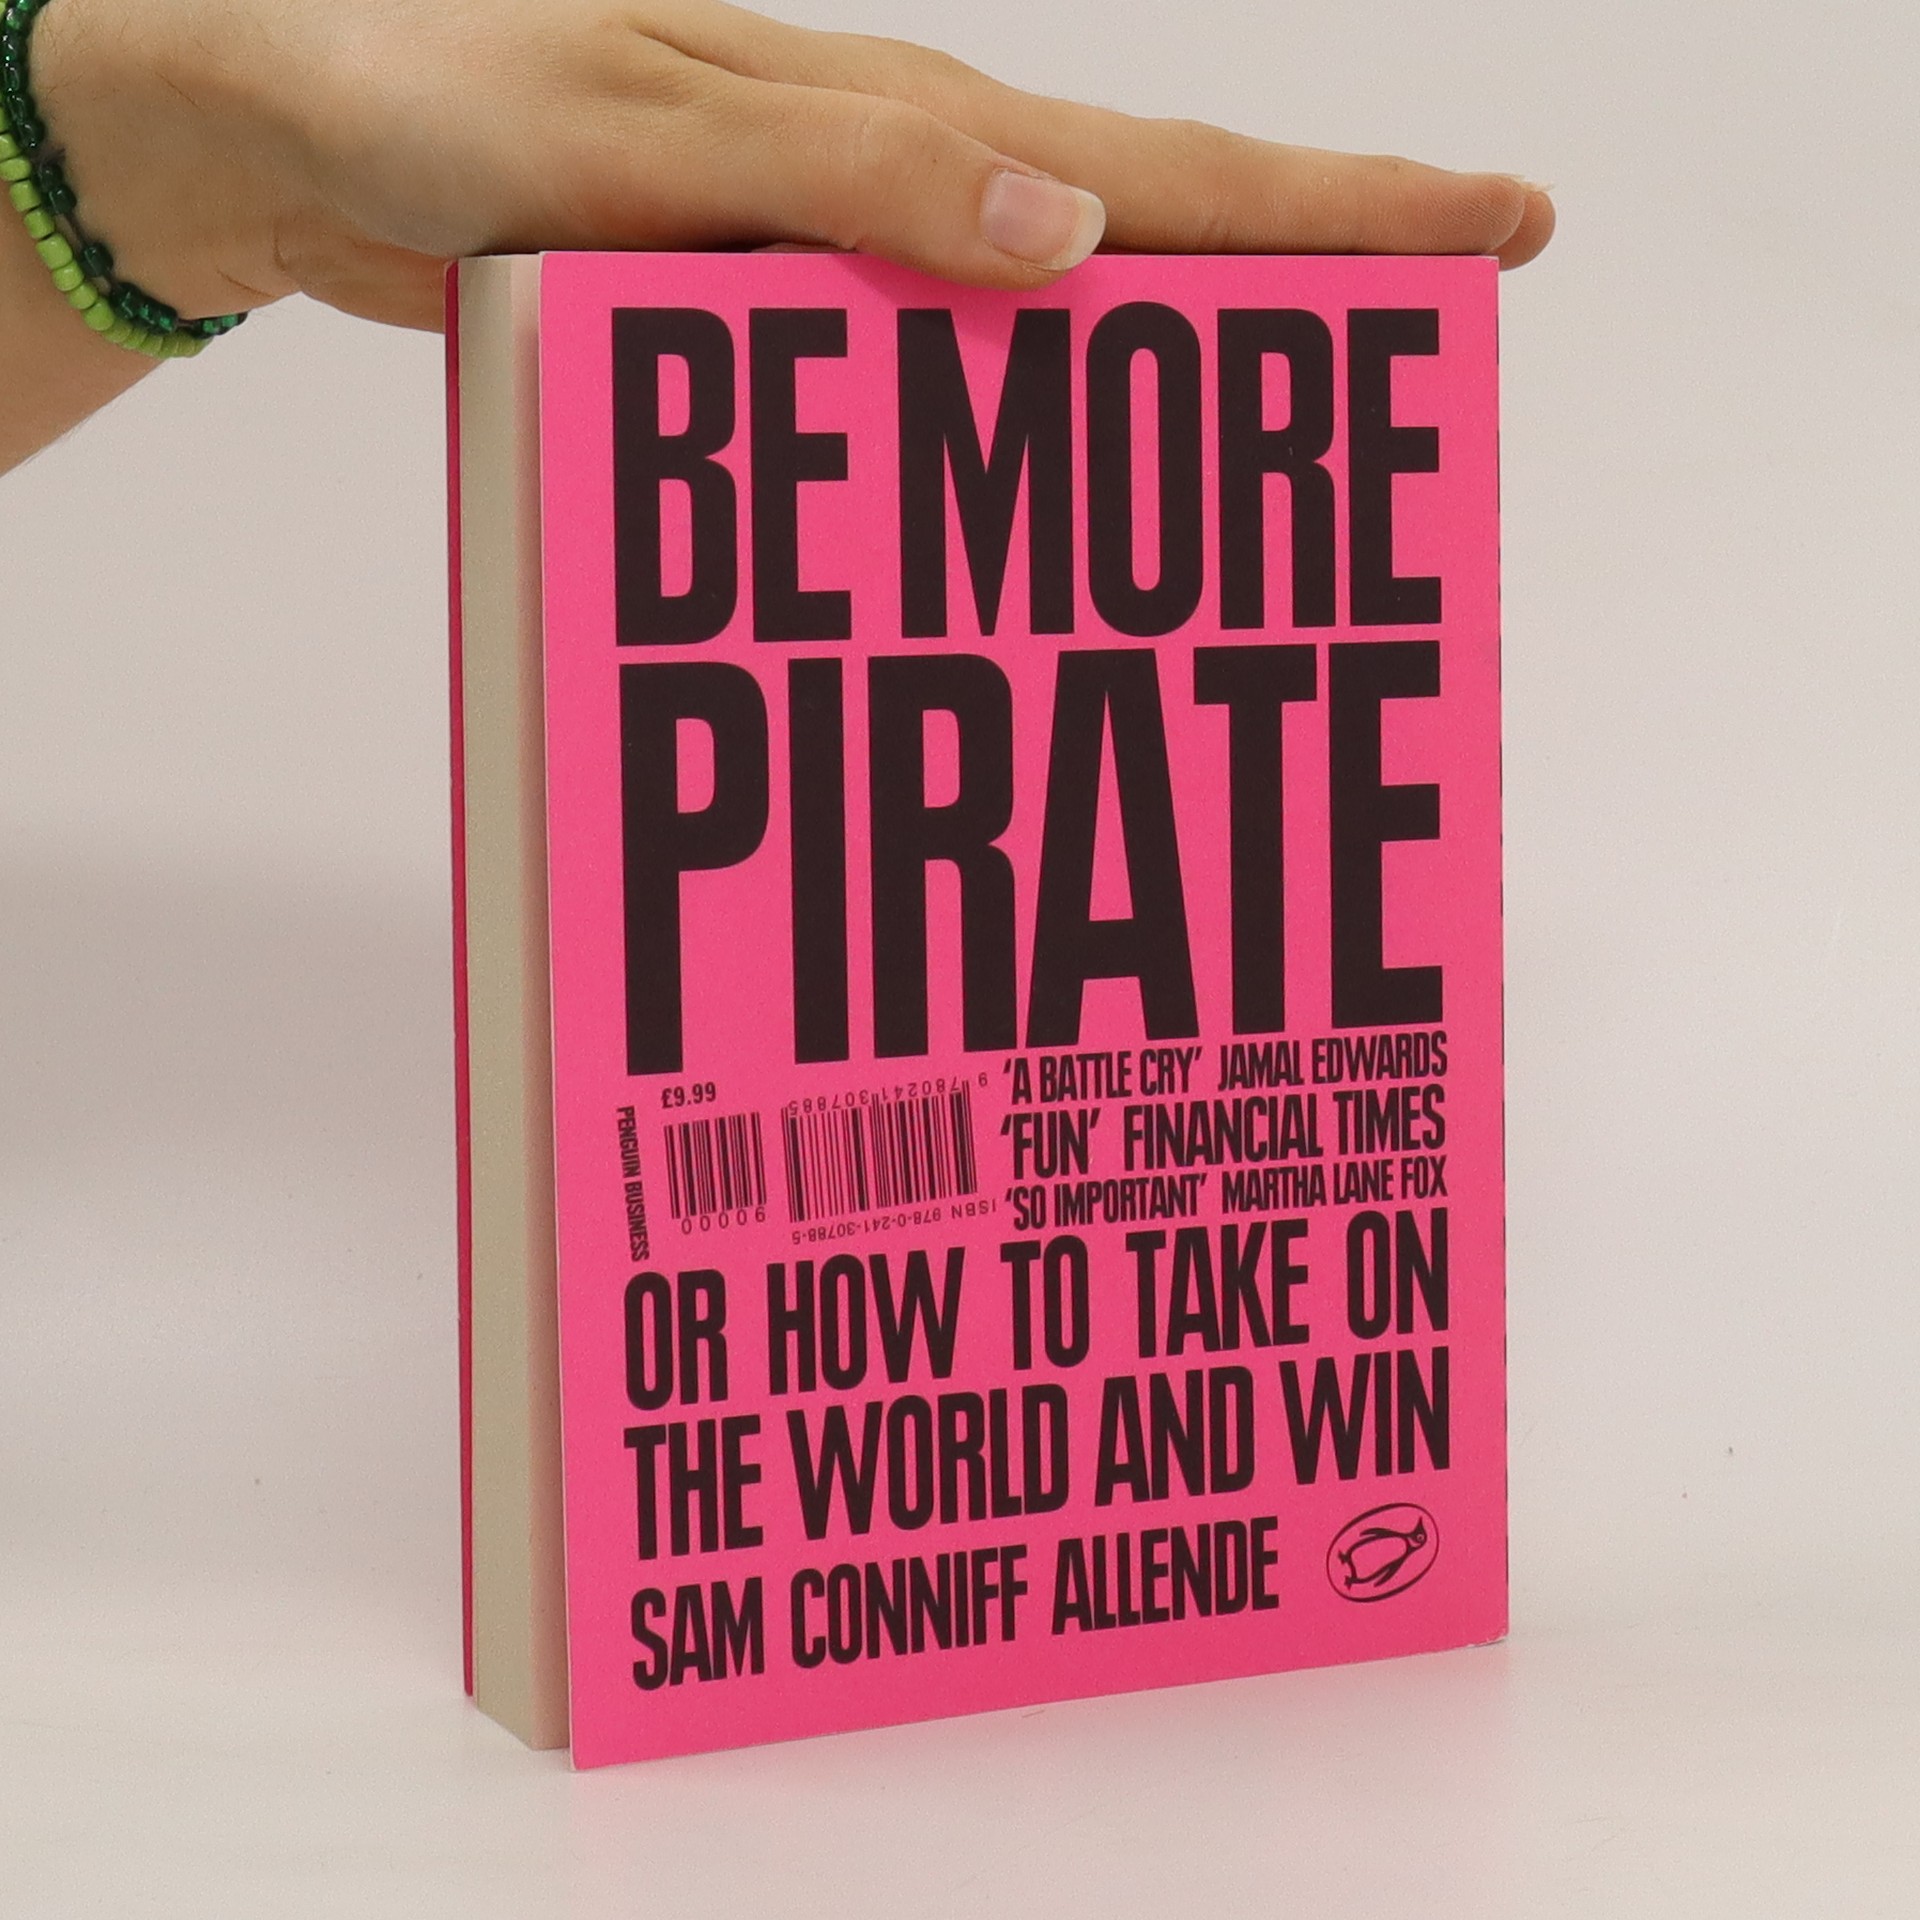 Be More Pirate by Sam Conniff